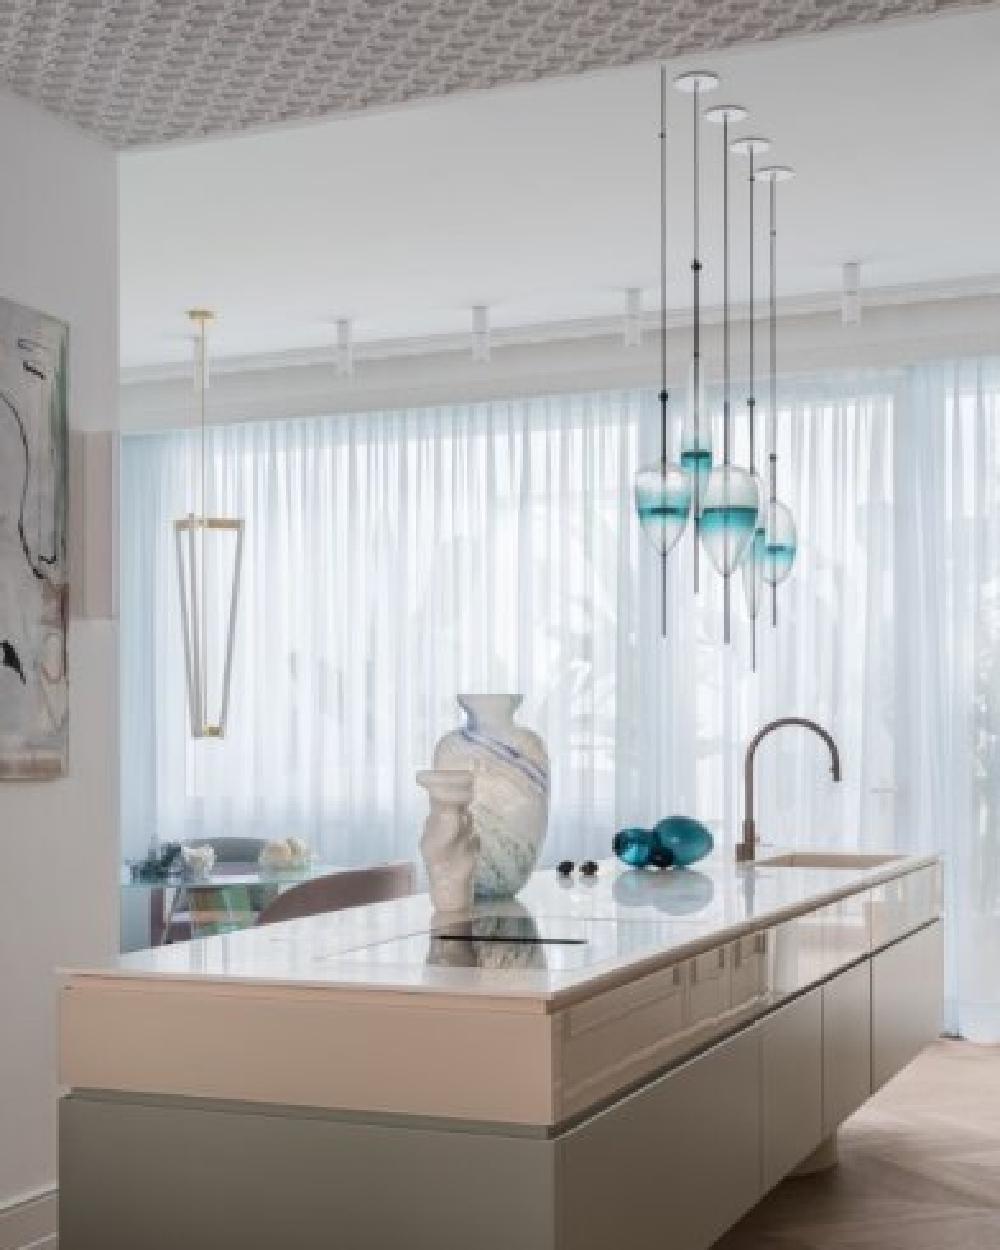 FLOW[T] S3 Pendant lamp in White by Nao Tamura for Wonderglass For Sale 1